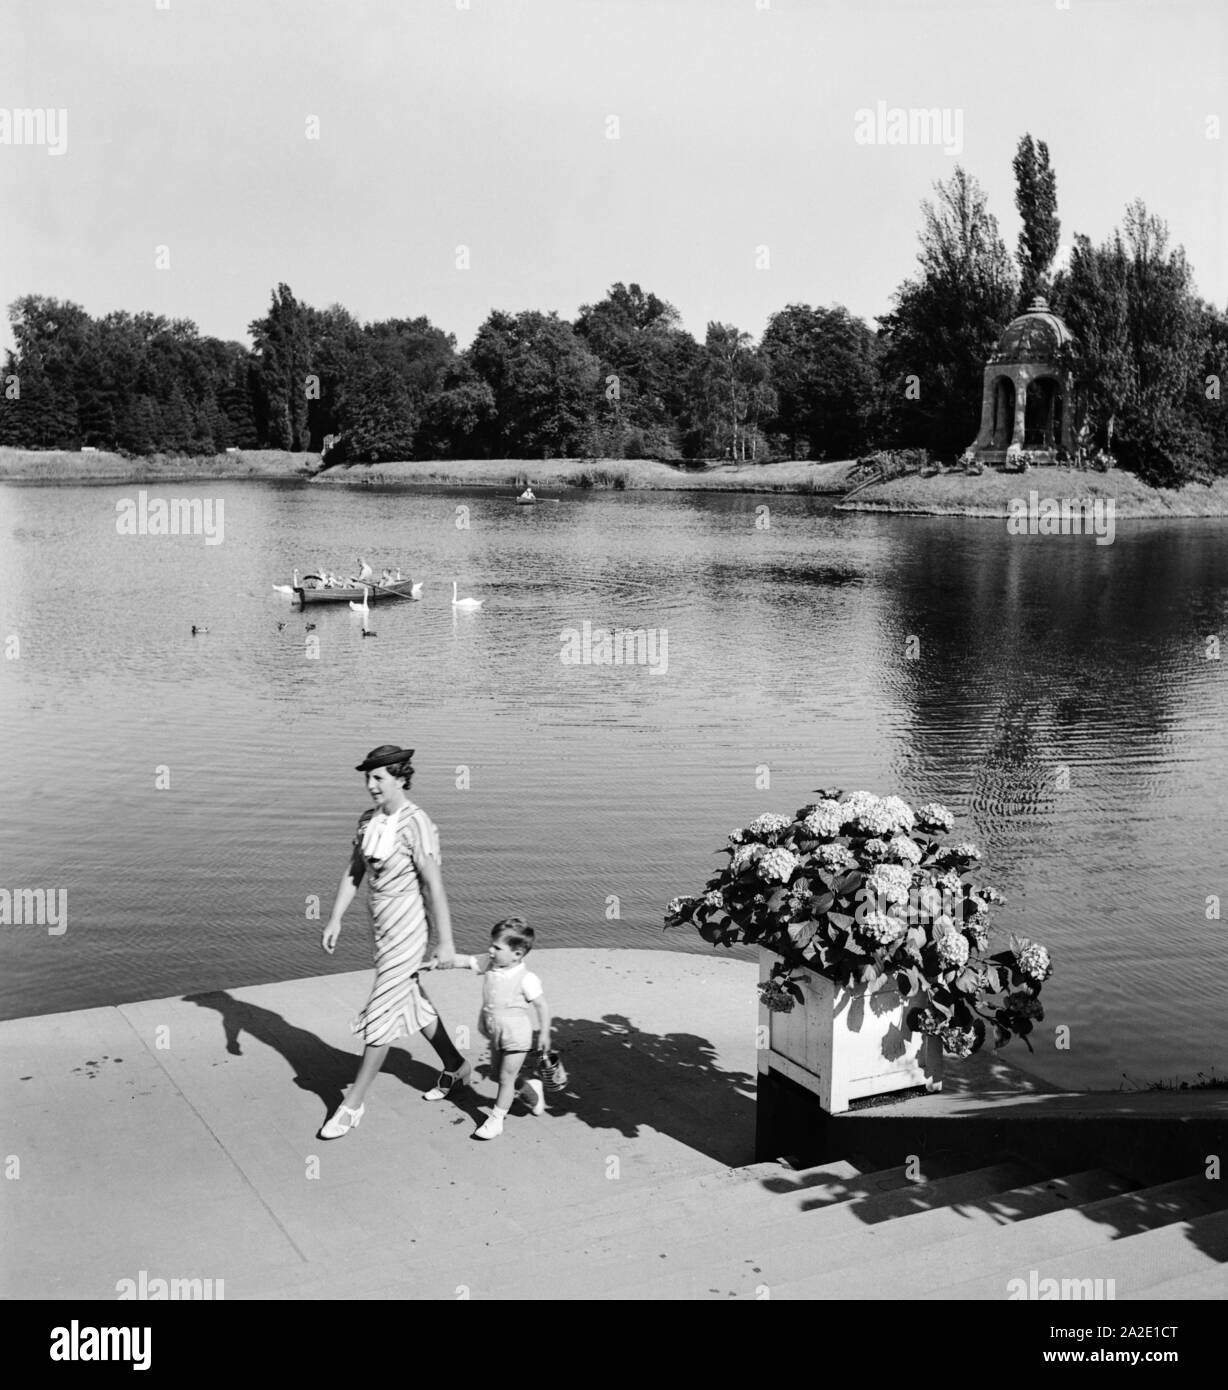 Mutter nd Kind bei einem Spaziergang am Adolf Mittag See in Magdeburg, Deutschland 1930er Jahre. Mother and child stolling by the artificial Adolf Mittag lake at Magdeburg, Germany 1930s. Stock Photo